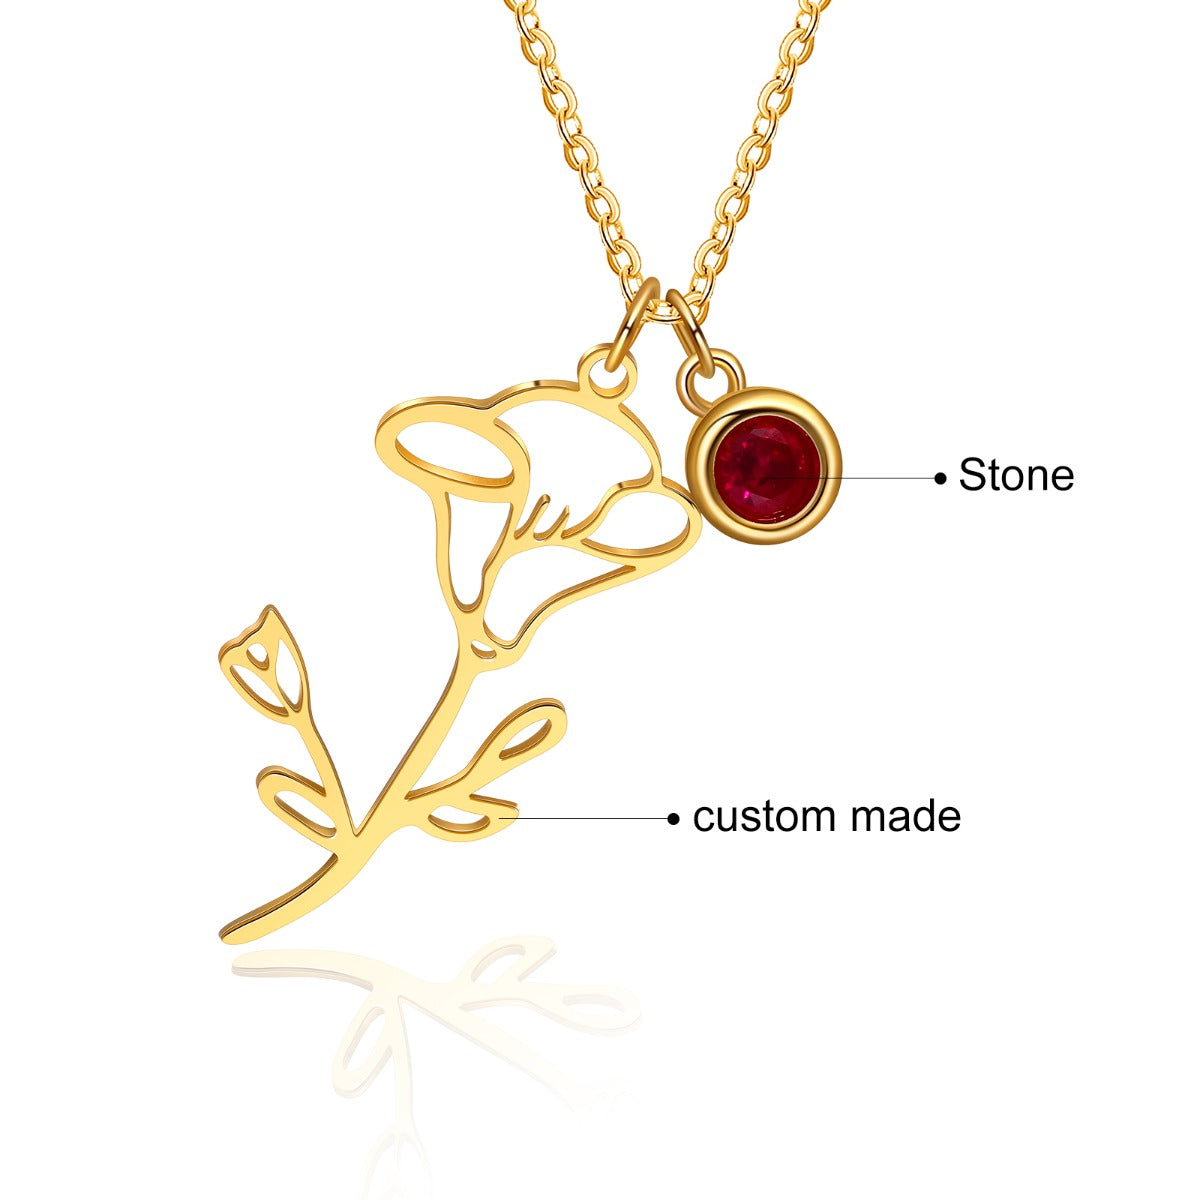 Birth Flower 925 sterling silver necklace with Birthstone